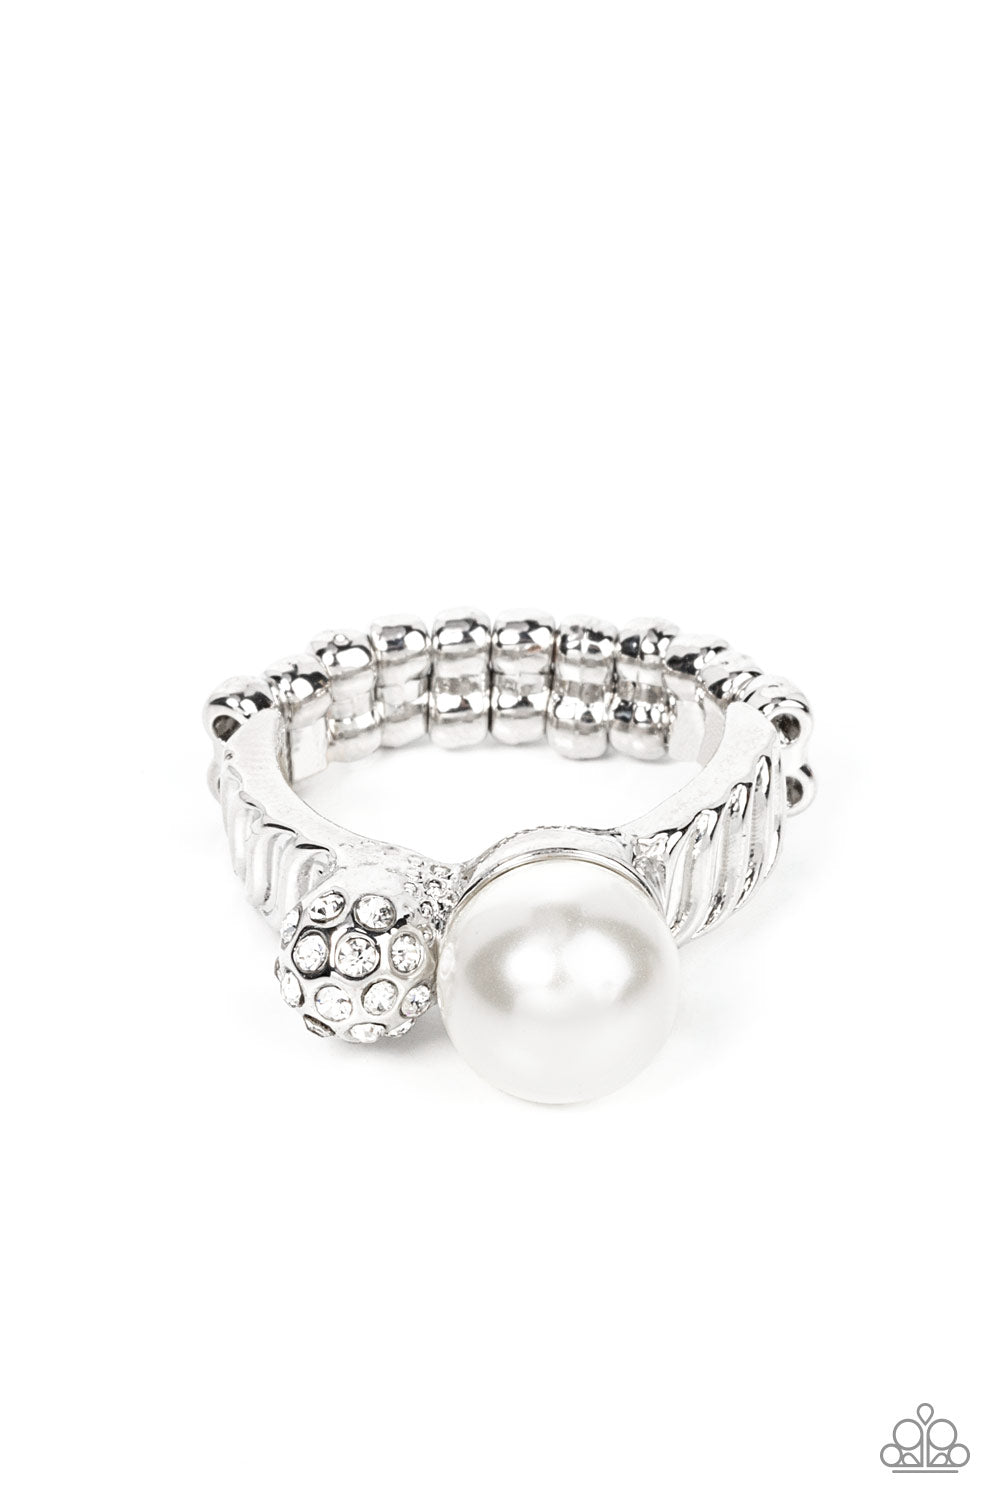 Paparazzi Accessories - A-List Applique - White Pearl Rings an oversized white pearl and white rhinestone encrusted silver bead embellish the front of a serrated silver band, resulting in a bubbly centerpiece atop the finger. Features a dainty stretchy band for a flexible fit.  Sold as one individual ring.